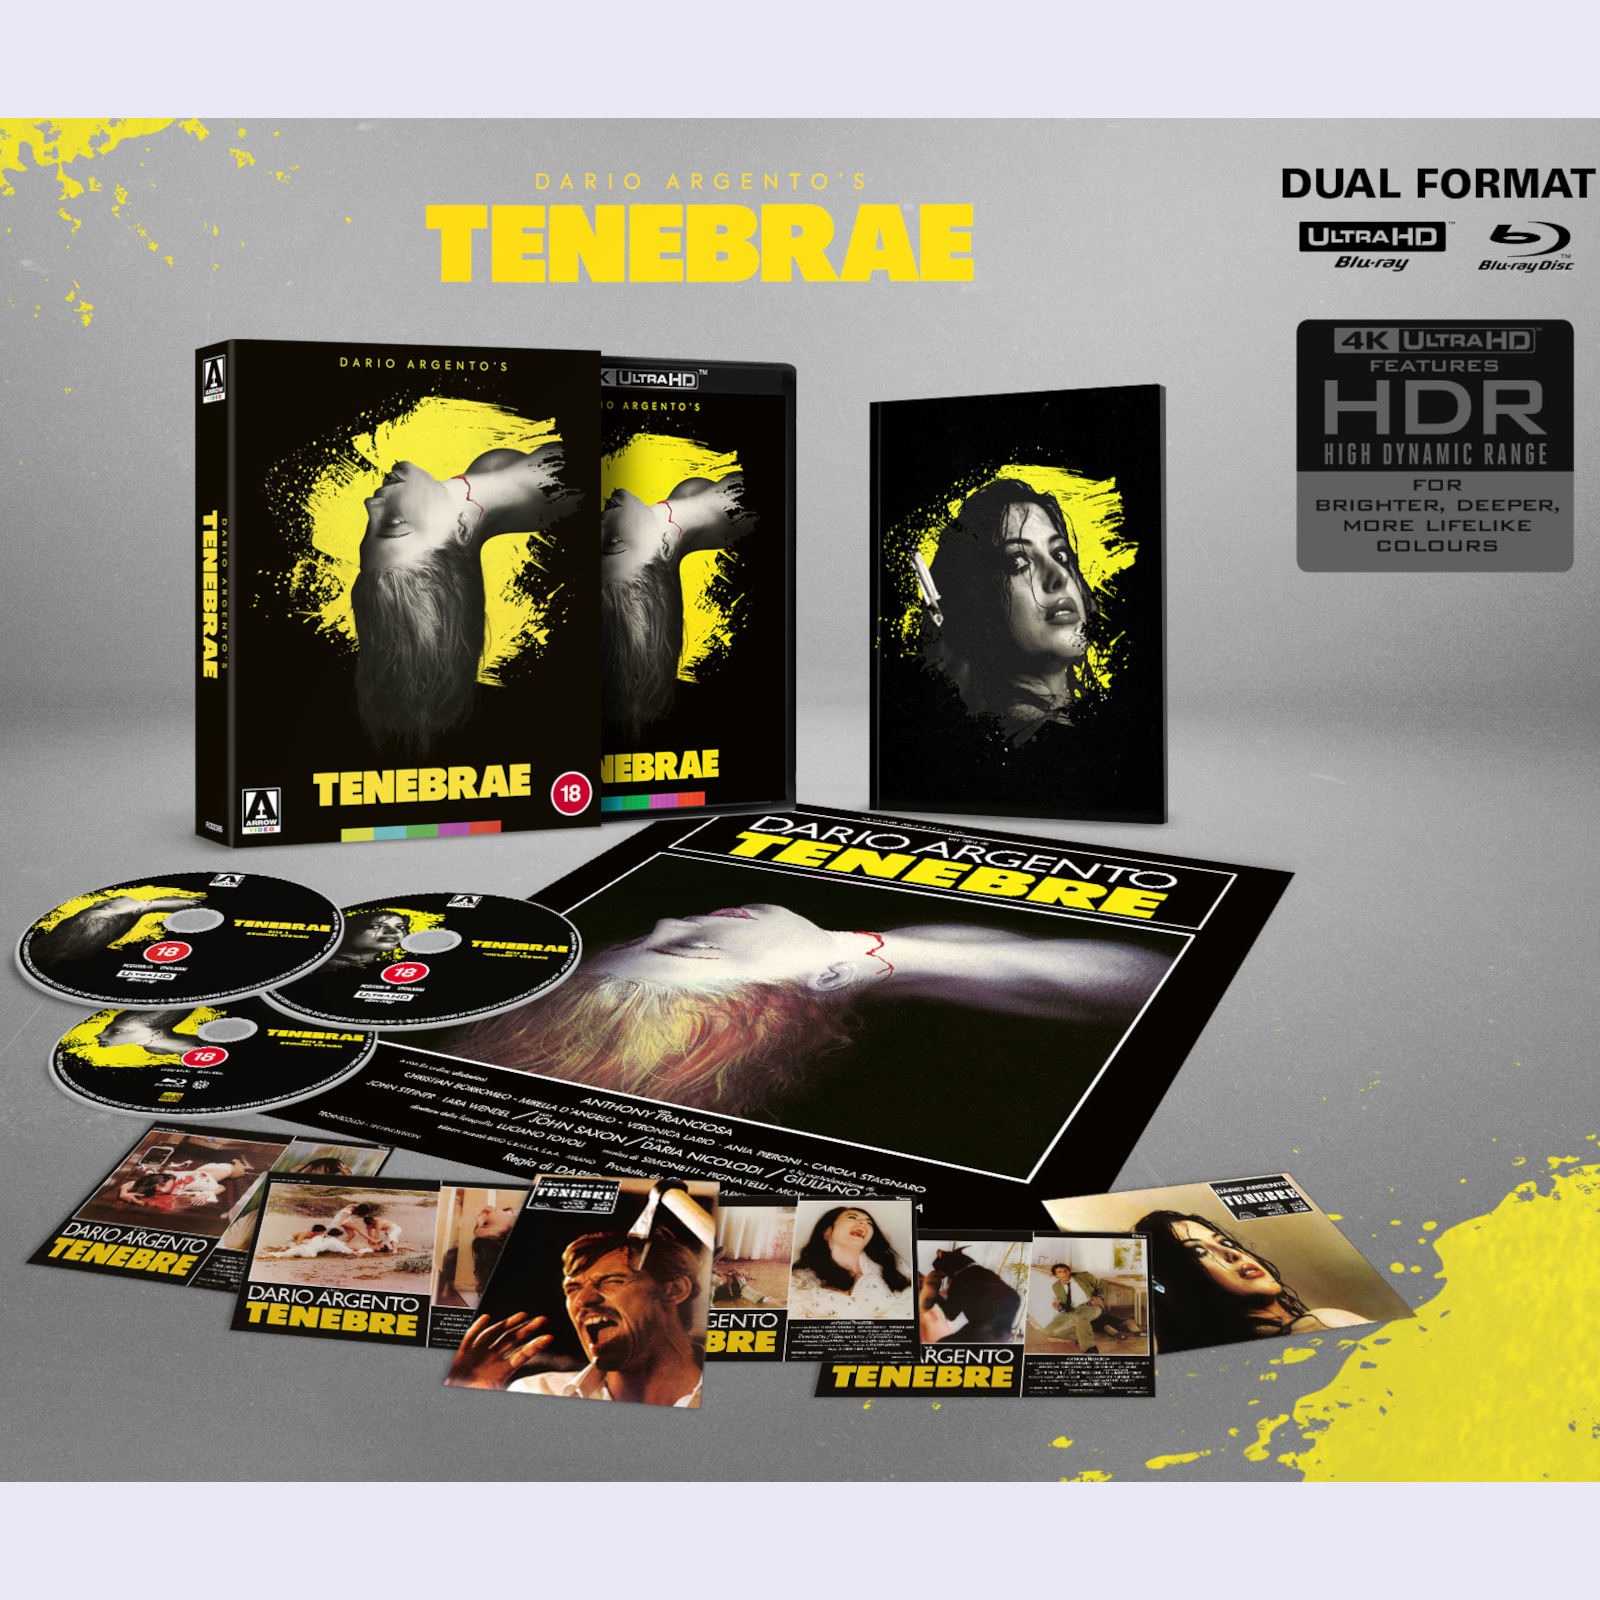 Image showing the bundle included. Text reads,Dario Argento's Tenebrae. Dual Format, Ultra HD Blu-Ray, Blu-Ray Disc. 4K Ultra HD, features HDR High Dynamic Range. For brighter, deeper, more lifelike colours